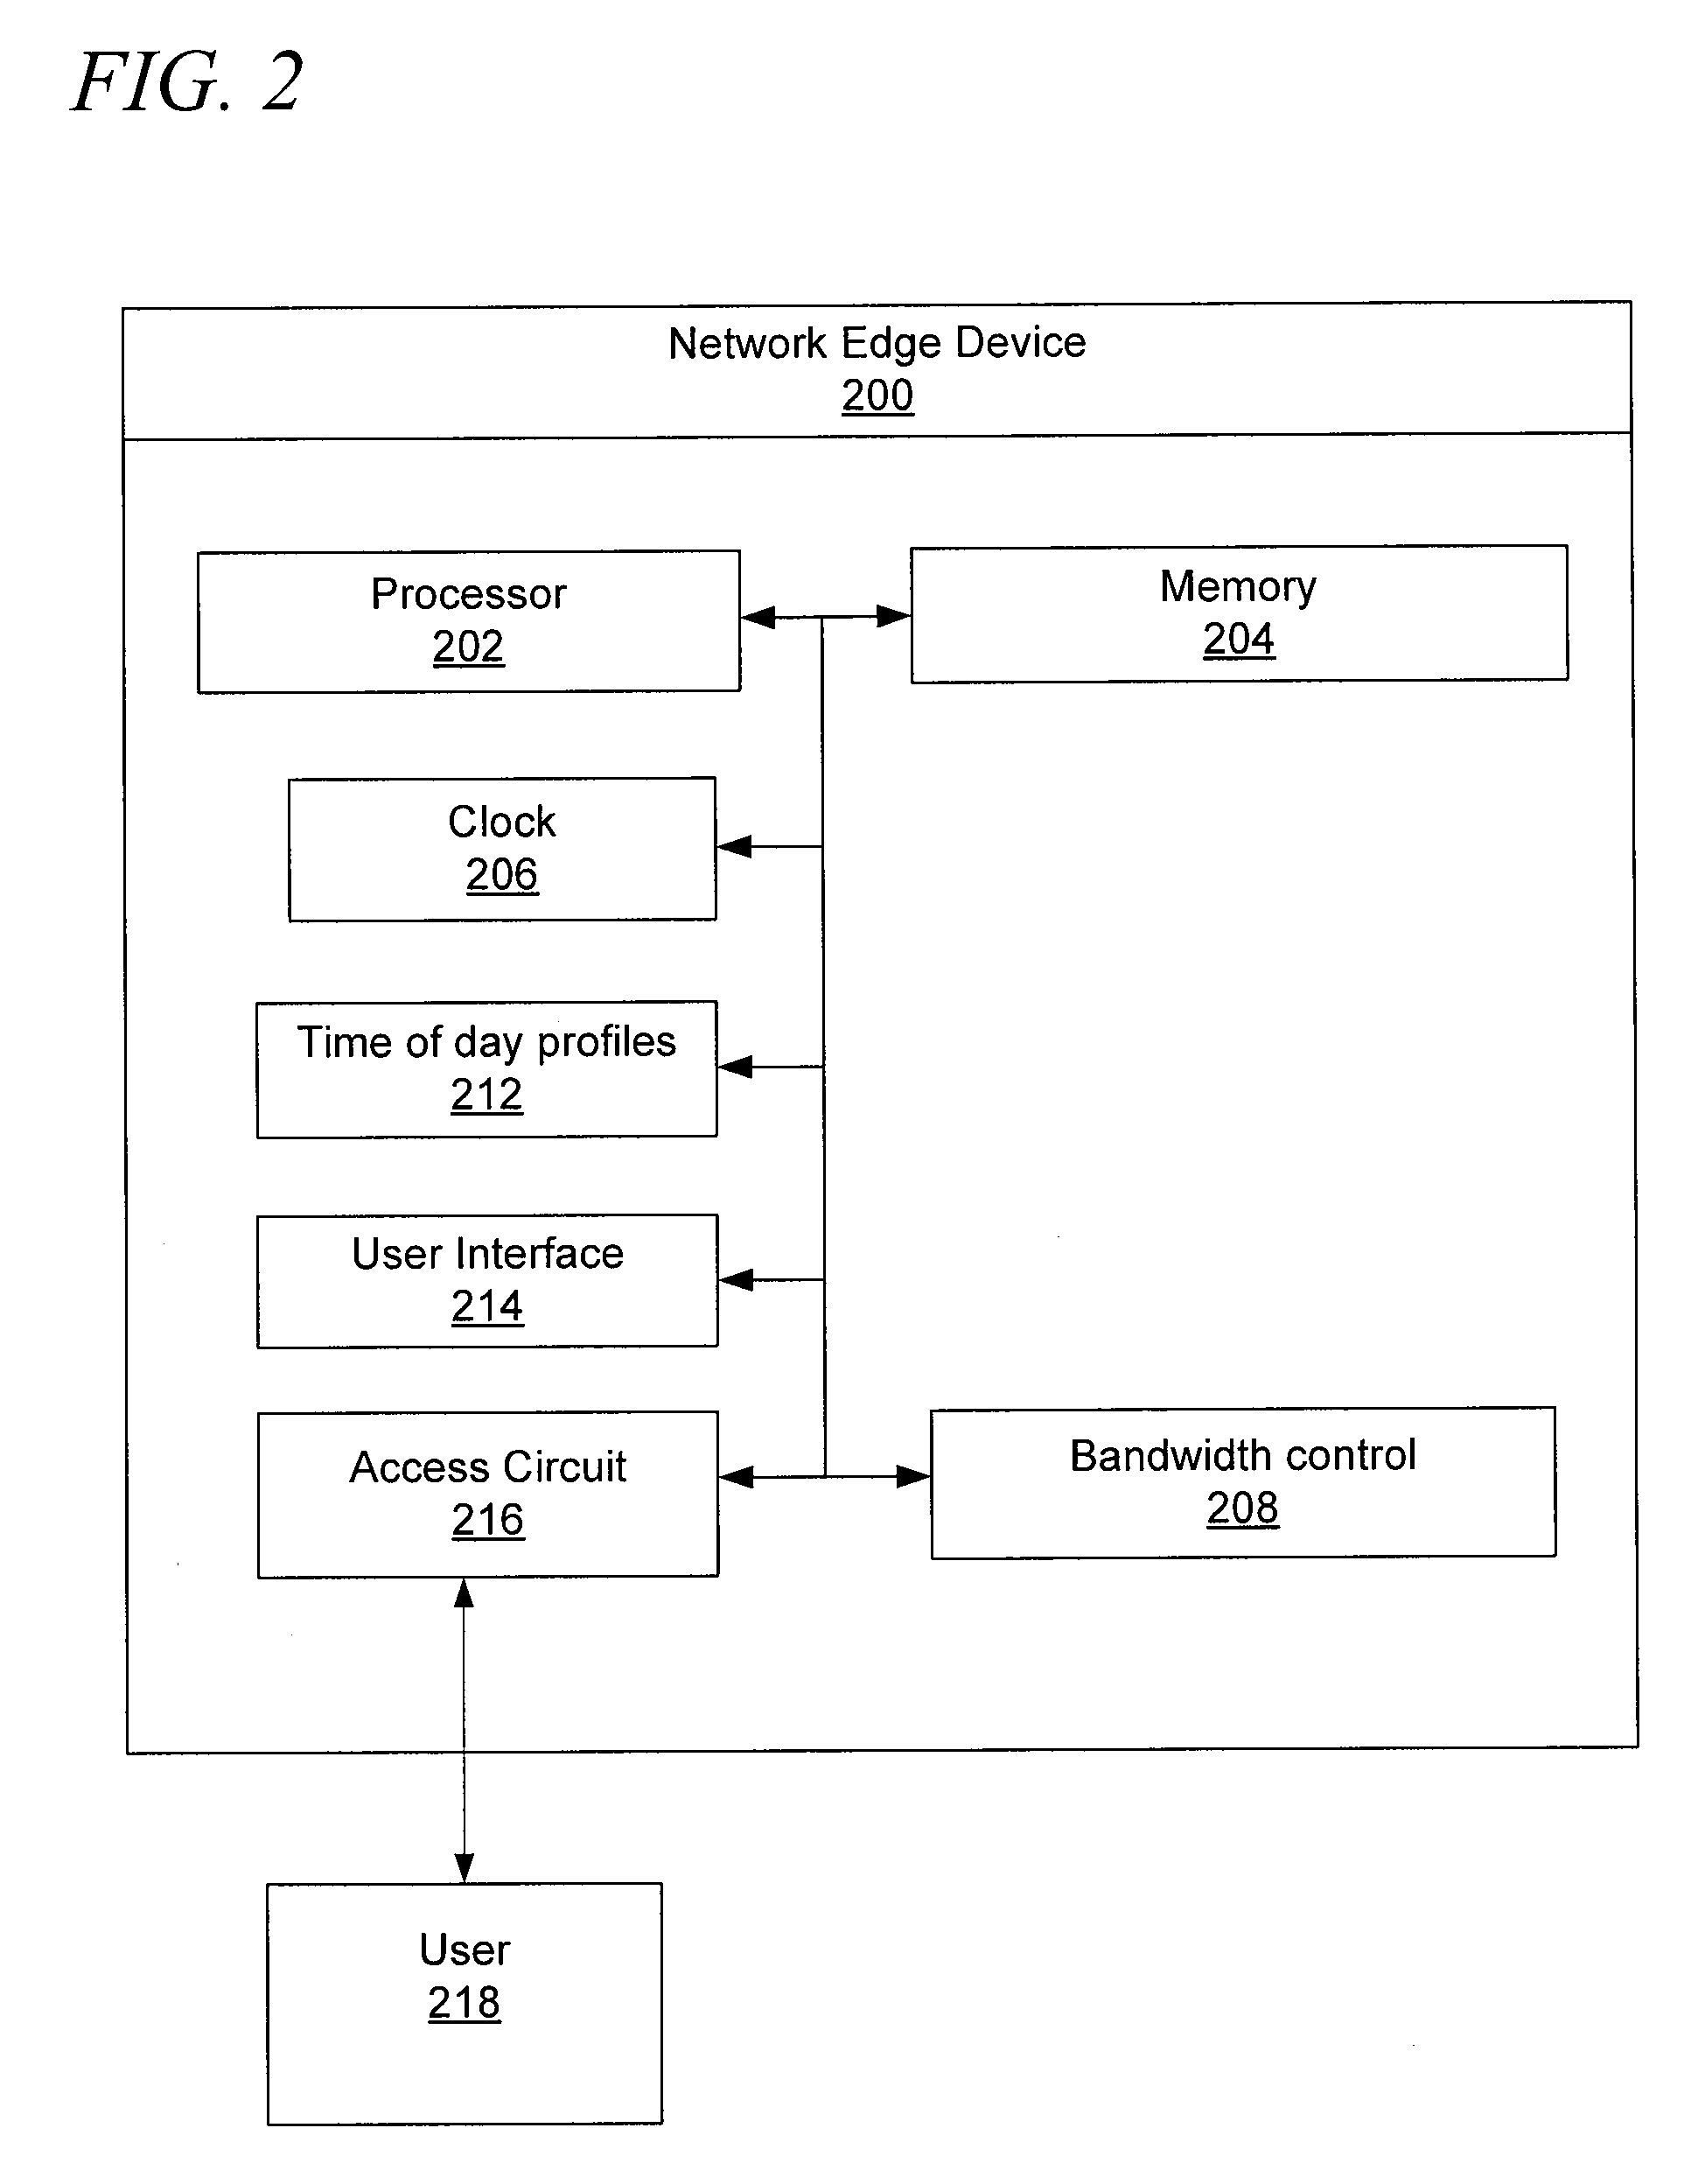 System and method for adjusting bandwidth based on a time of day profile